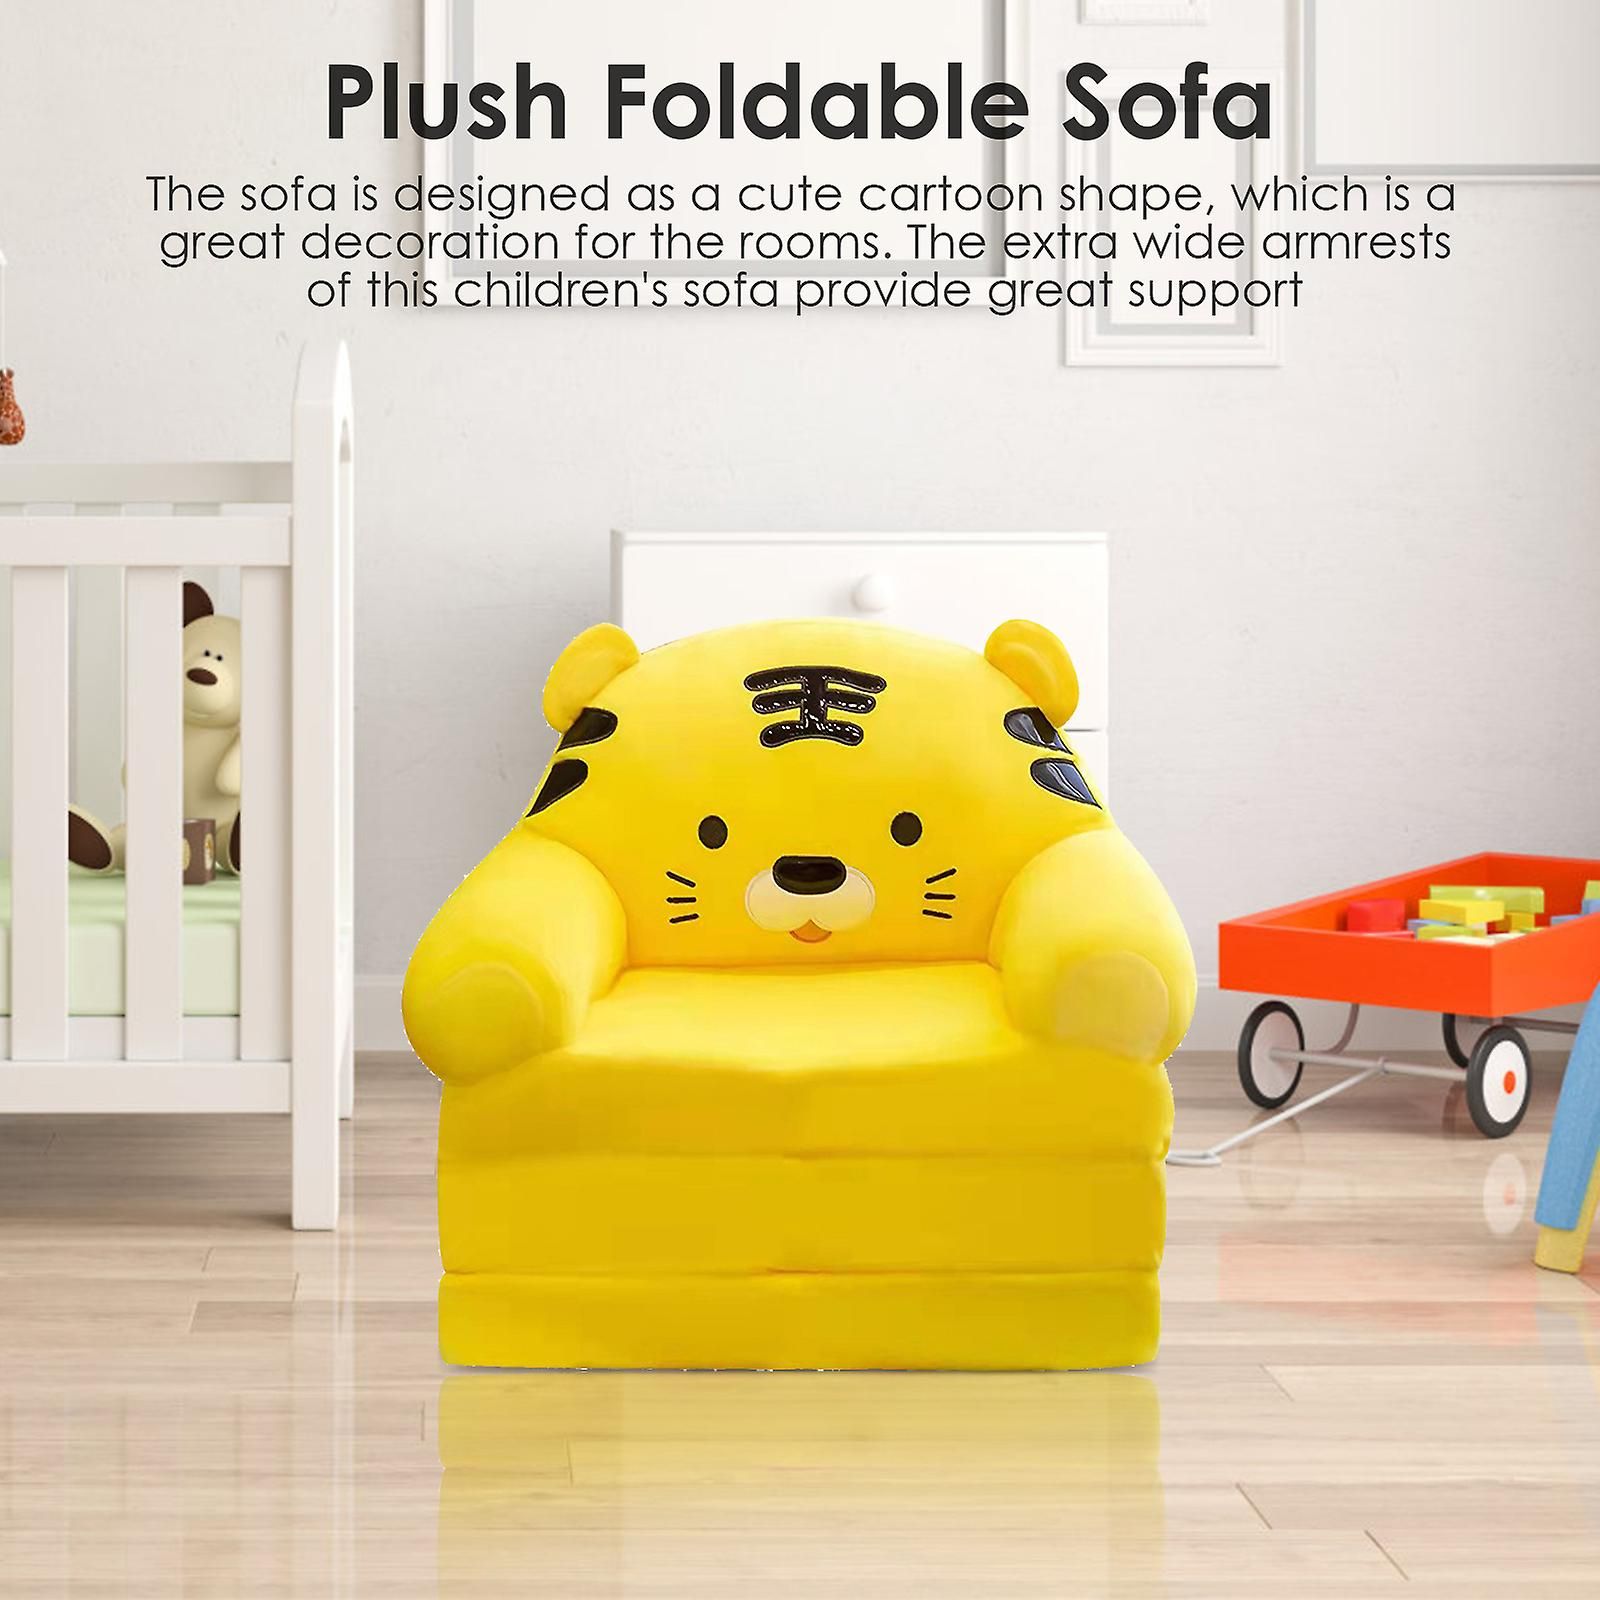 Cartoon Kids 2 In 1 Foldable Sofa Bed For Reading, Playing And Napping |  Fruugo It With Regard To Children's Sofa Beds (View 6 of 15)